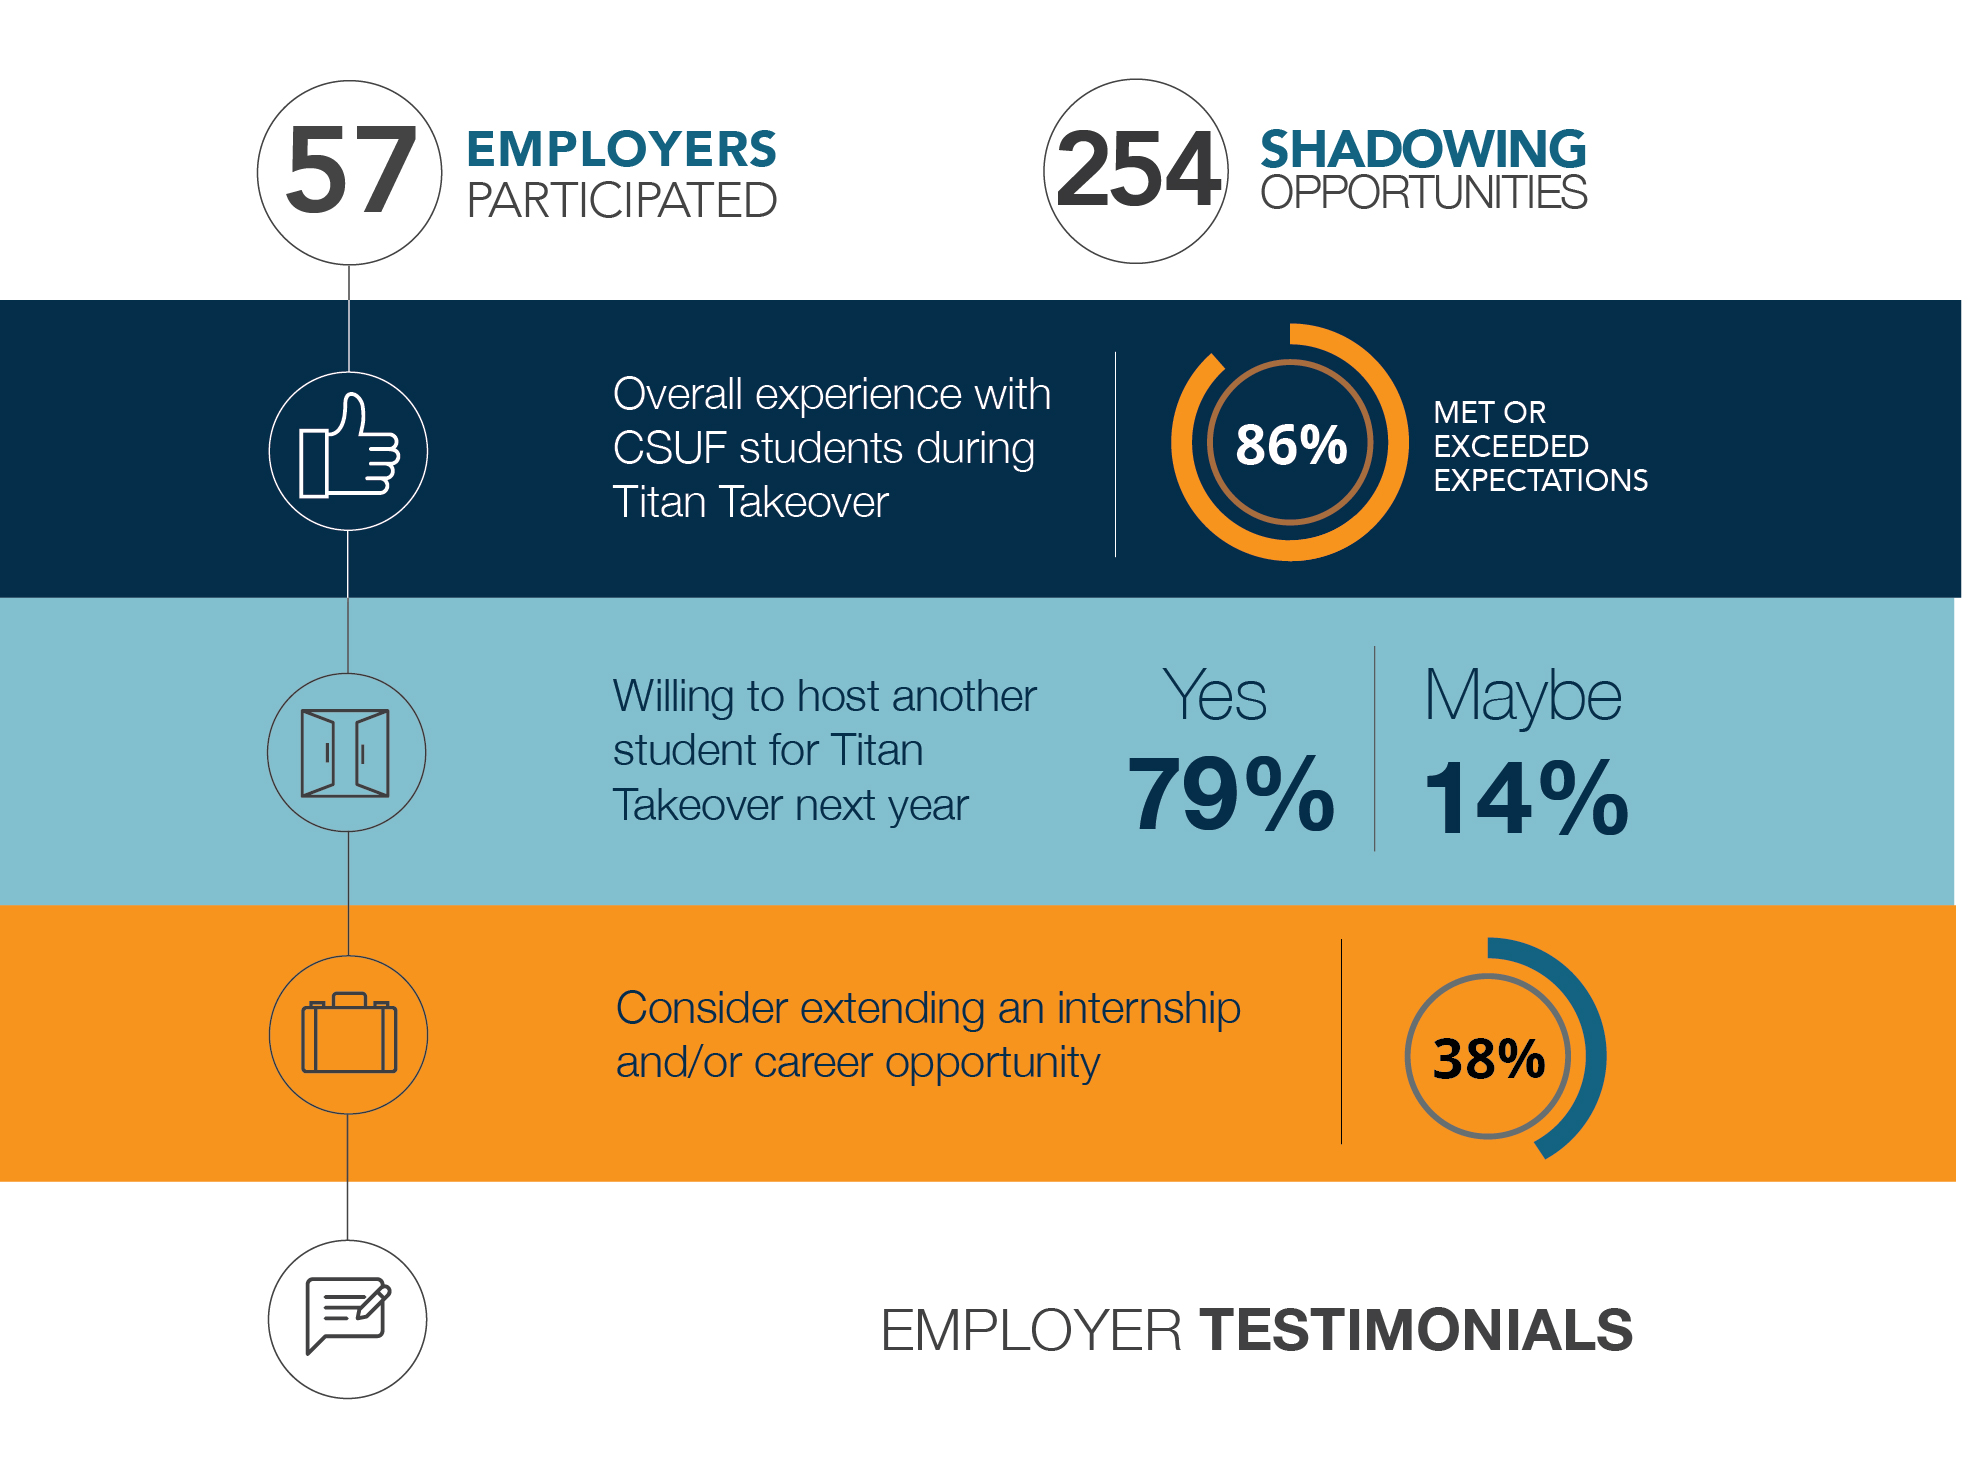 57 Employers Participated, 254 Shadowing Opportunities. Overall experience with CSUF students during Titan Takeover: 86% met or exceeded expectations.  Willing ot host another student for Titan Takeover next year: 79% Yes, 14% Maybe. Consider extending an internship and/or career opportunity: 38%.